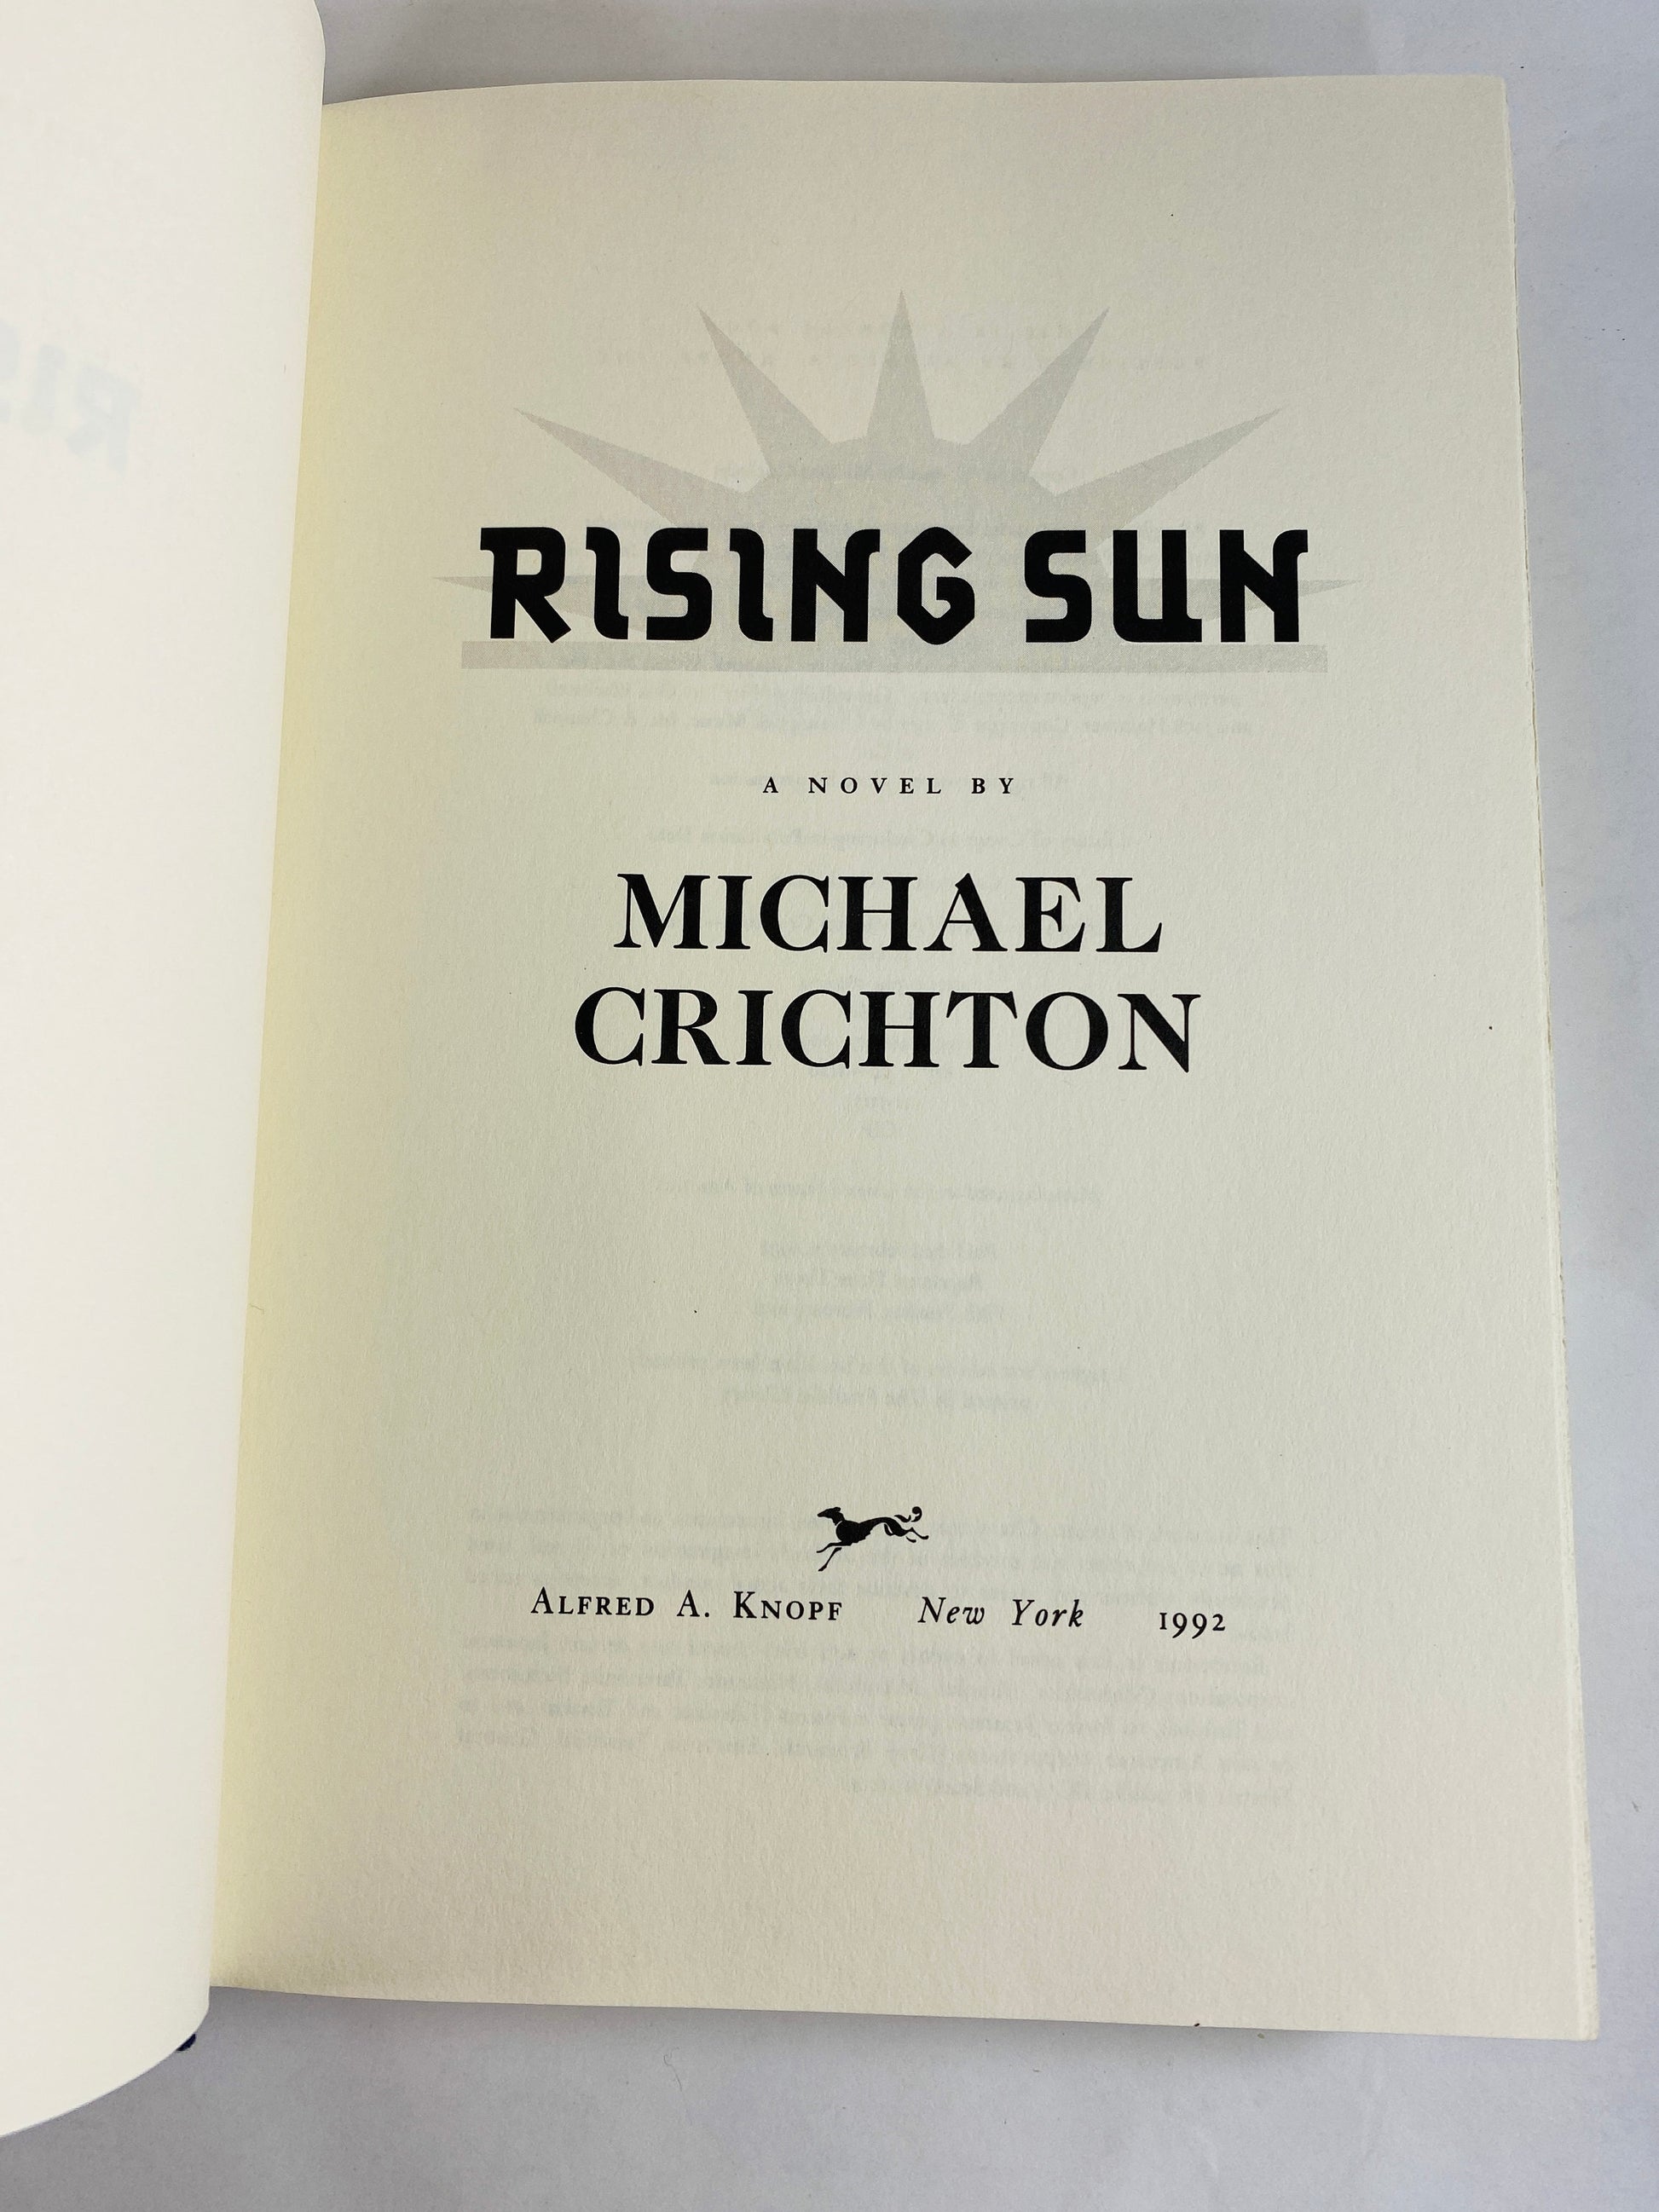 Rising Sun by Michael Crichton vintage book circa 1992 set in Japan where business moguls compete for control of the electronics industry.